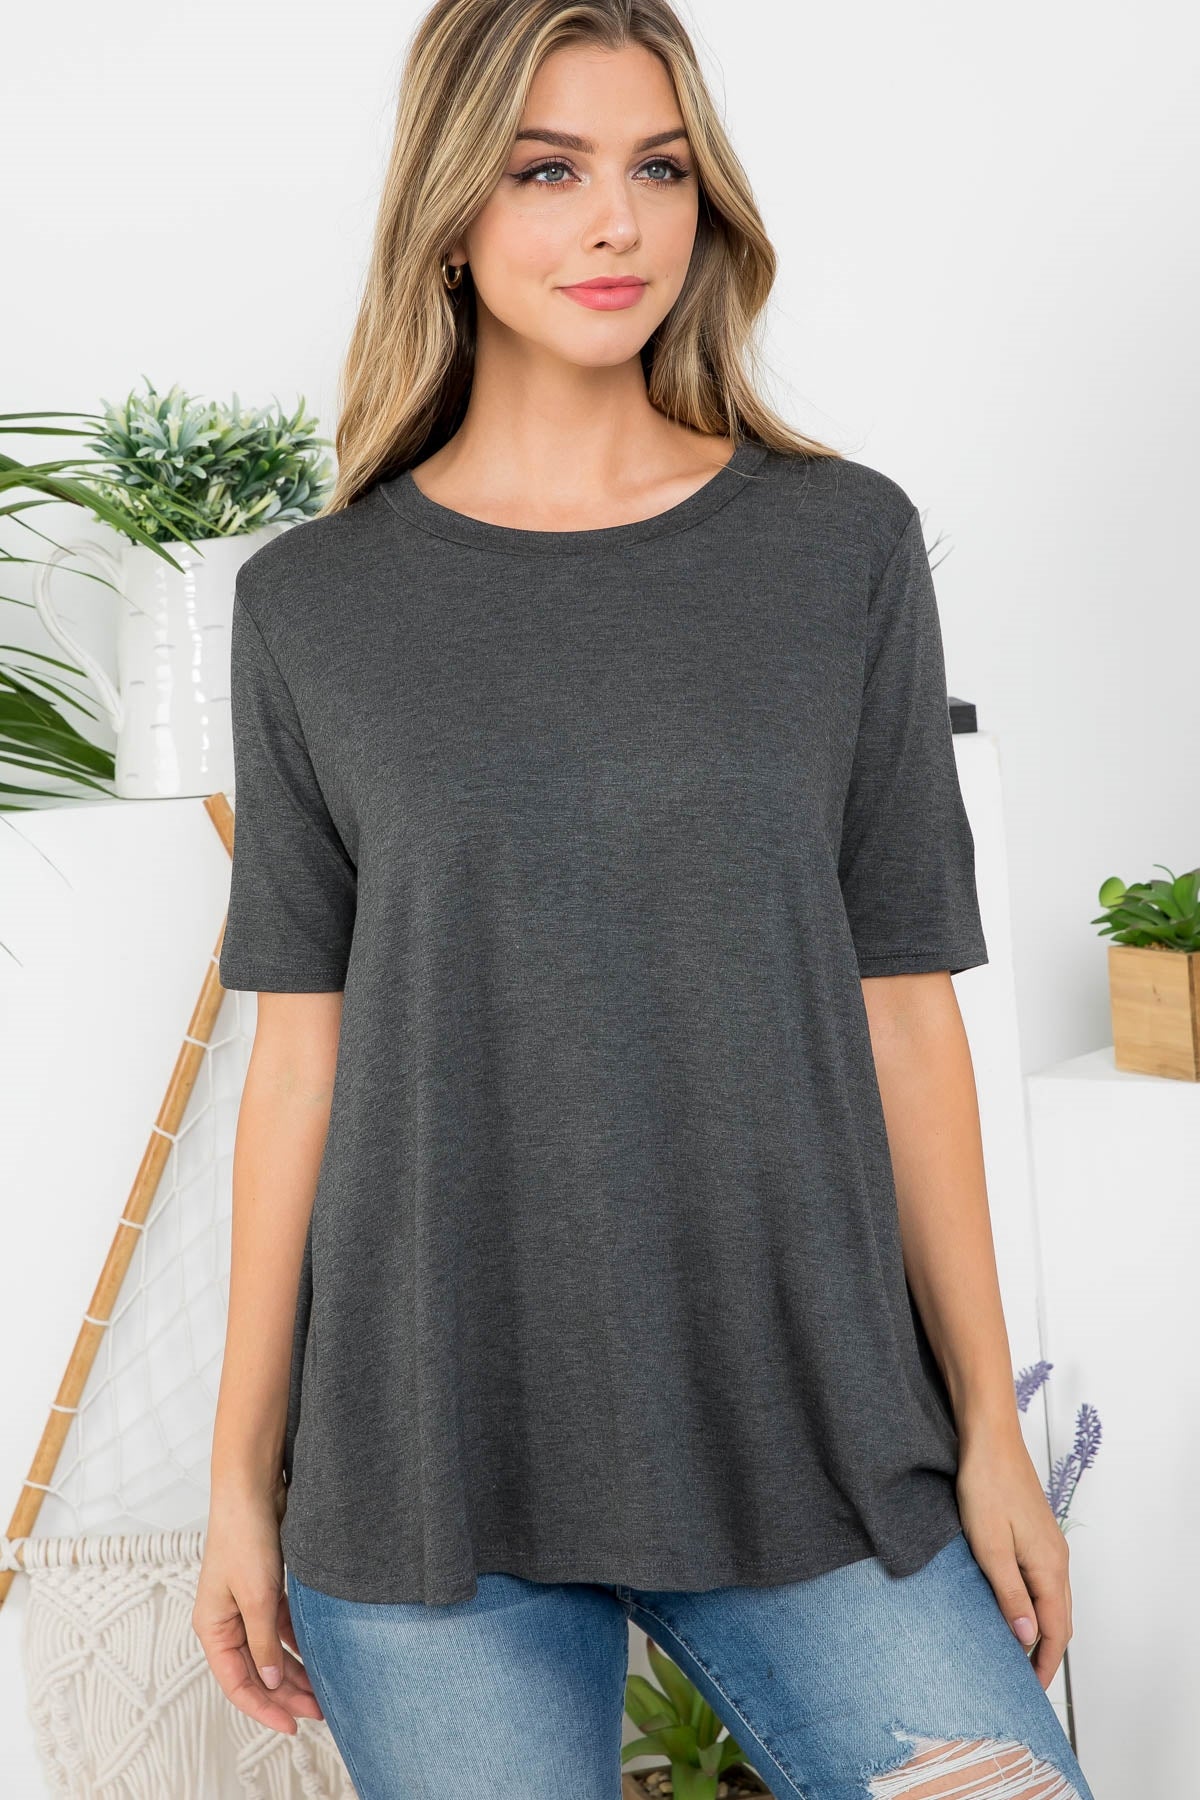 CHARCOAL ROUND NECK BABYDOLL TOP